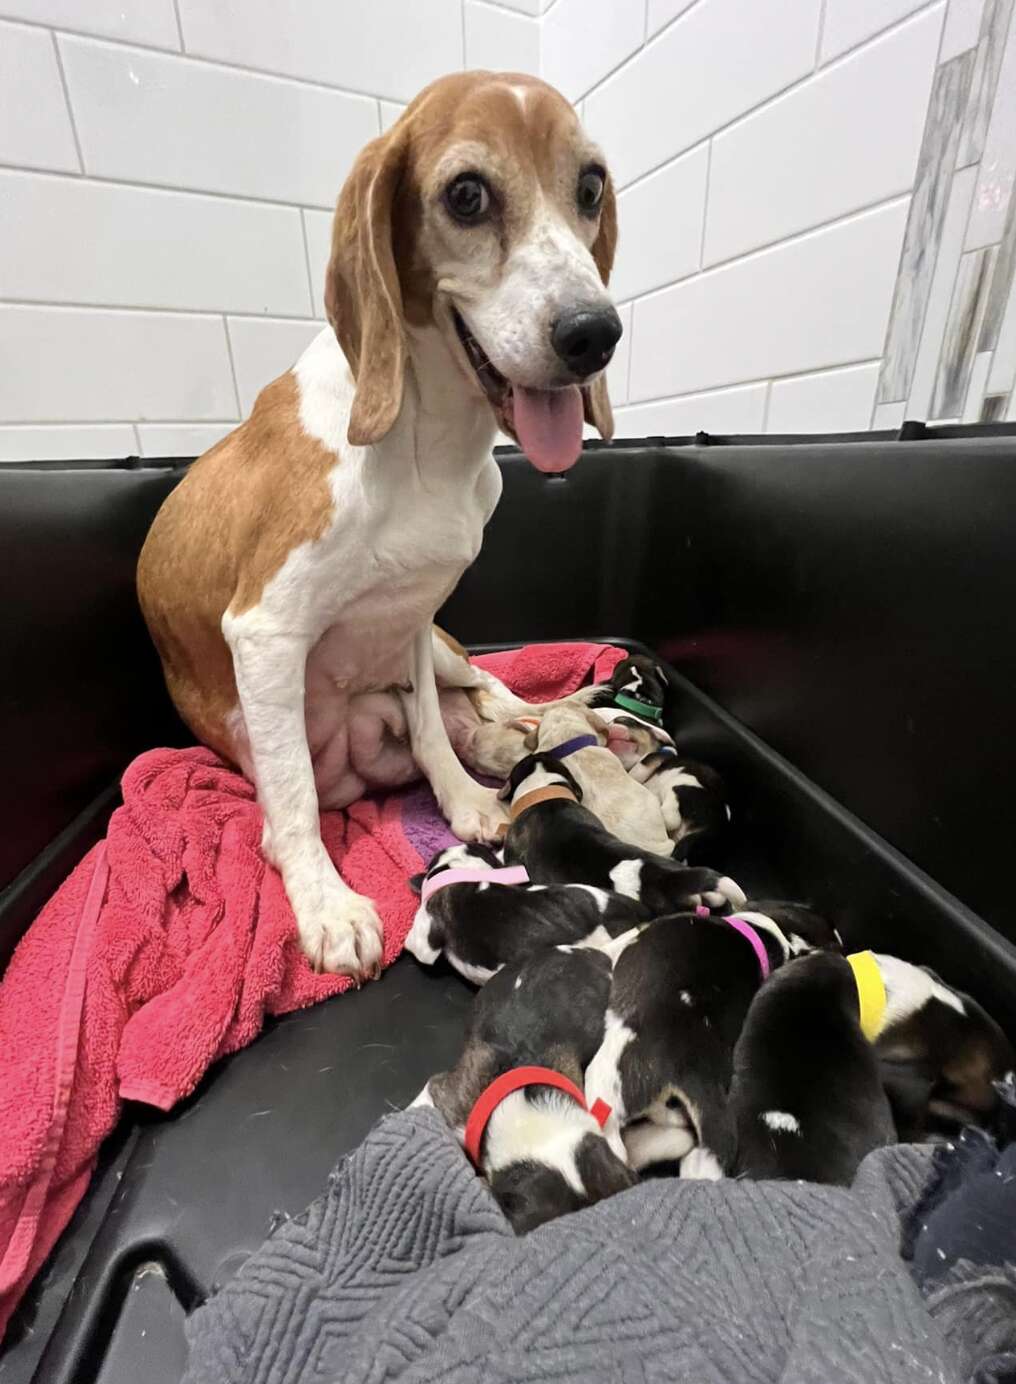 Beagle shows off her litter of pups.